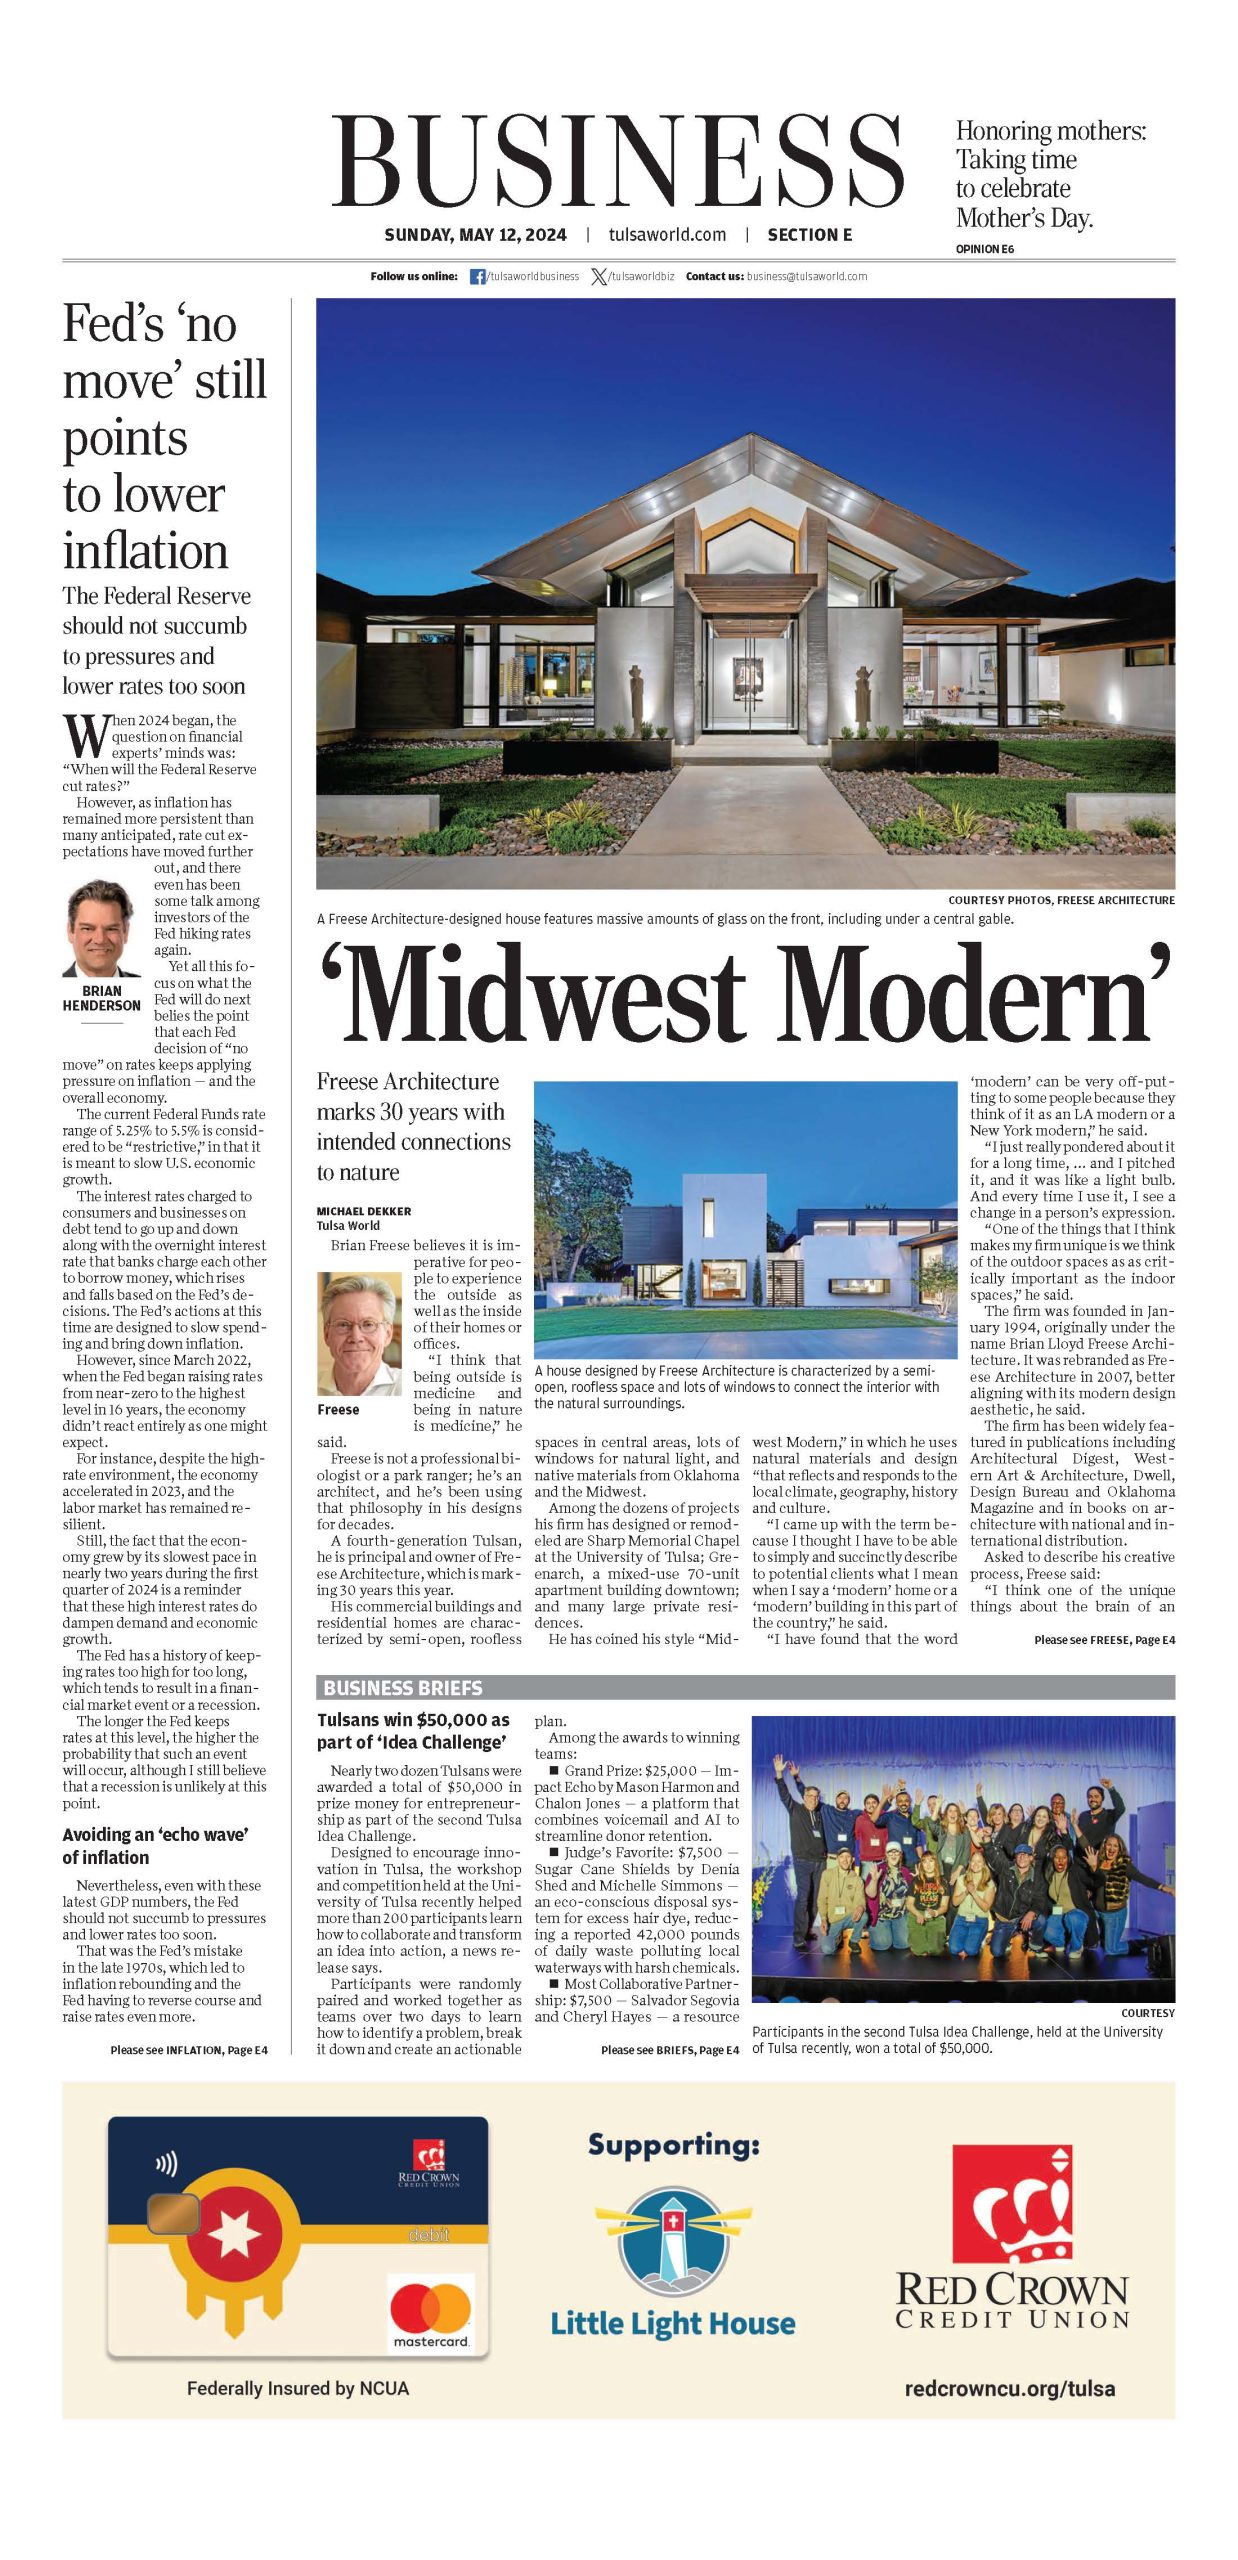 Midwest Modern – Freese Architecture marks 30 yeas with intended connections to nature Cover Photo